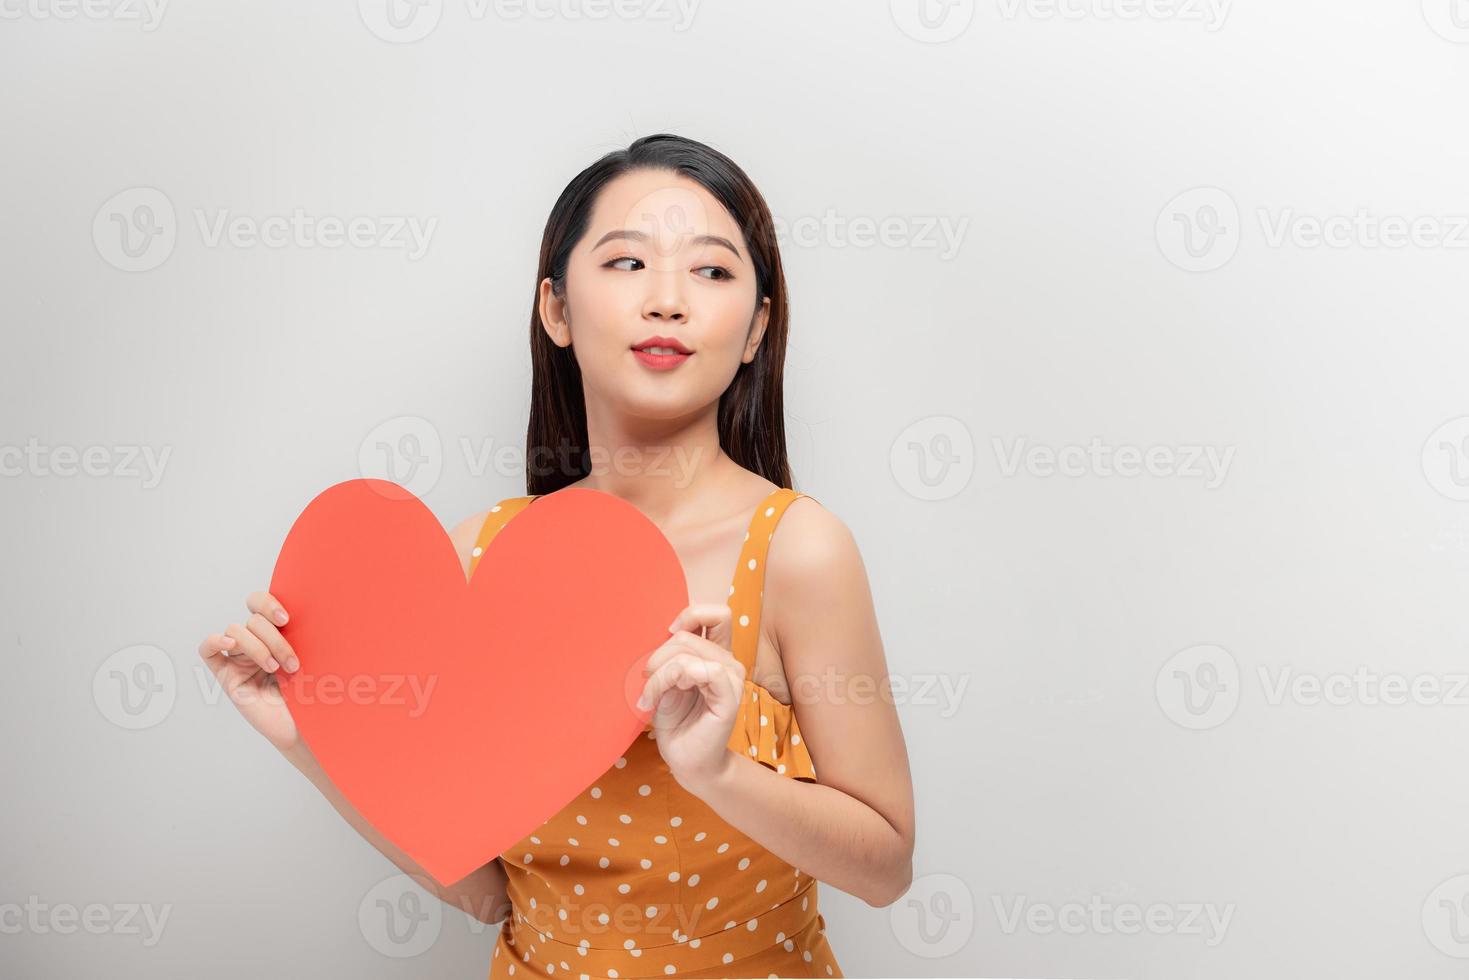 Woman holding big red heart on white background photo